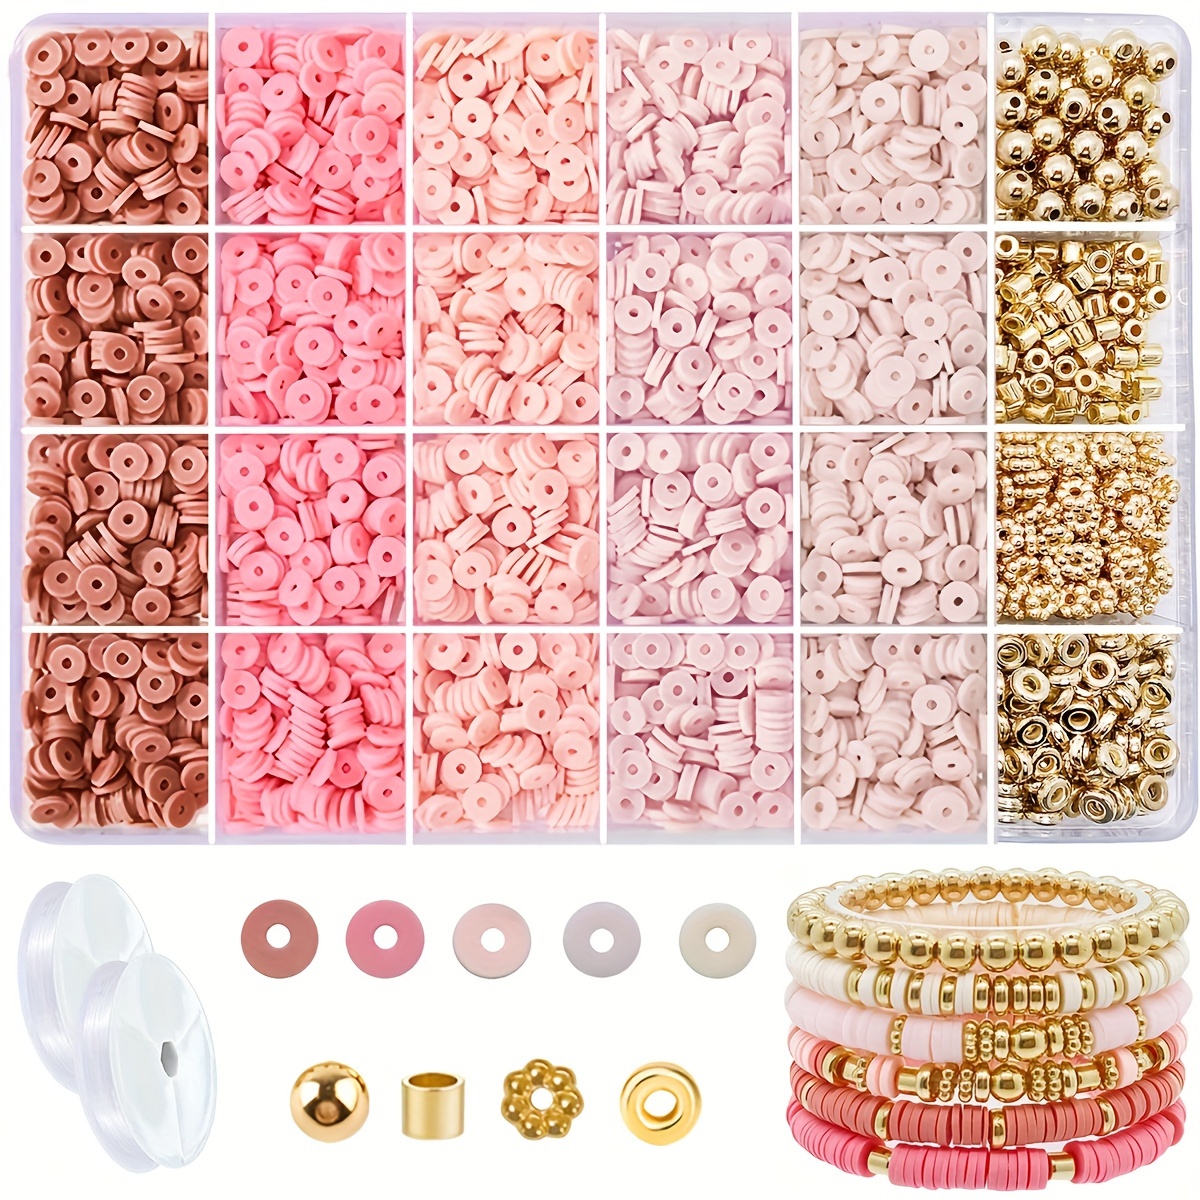 

2000+ Piece Polymer Clay Bead Bracelet Making Kit With 160 Spacer & Flower Beads, Crystal Elastic Cord - Elegant Diy Jewelry Craft Set In Unique Colors For Friendship Bracelets